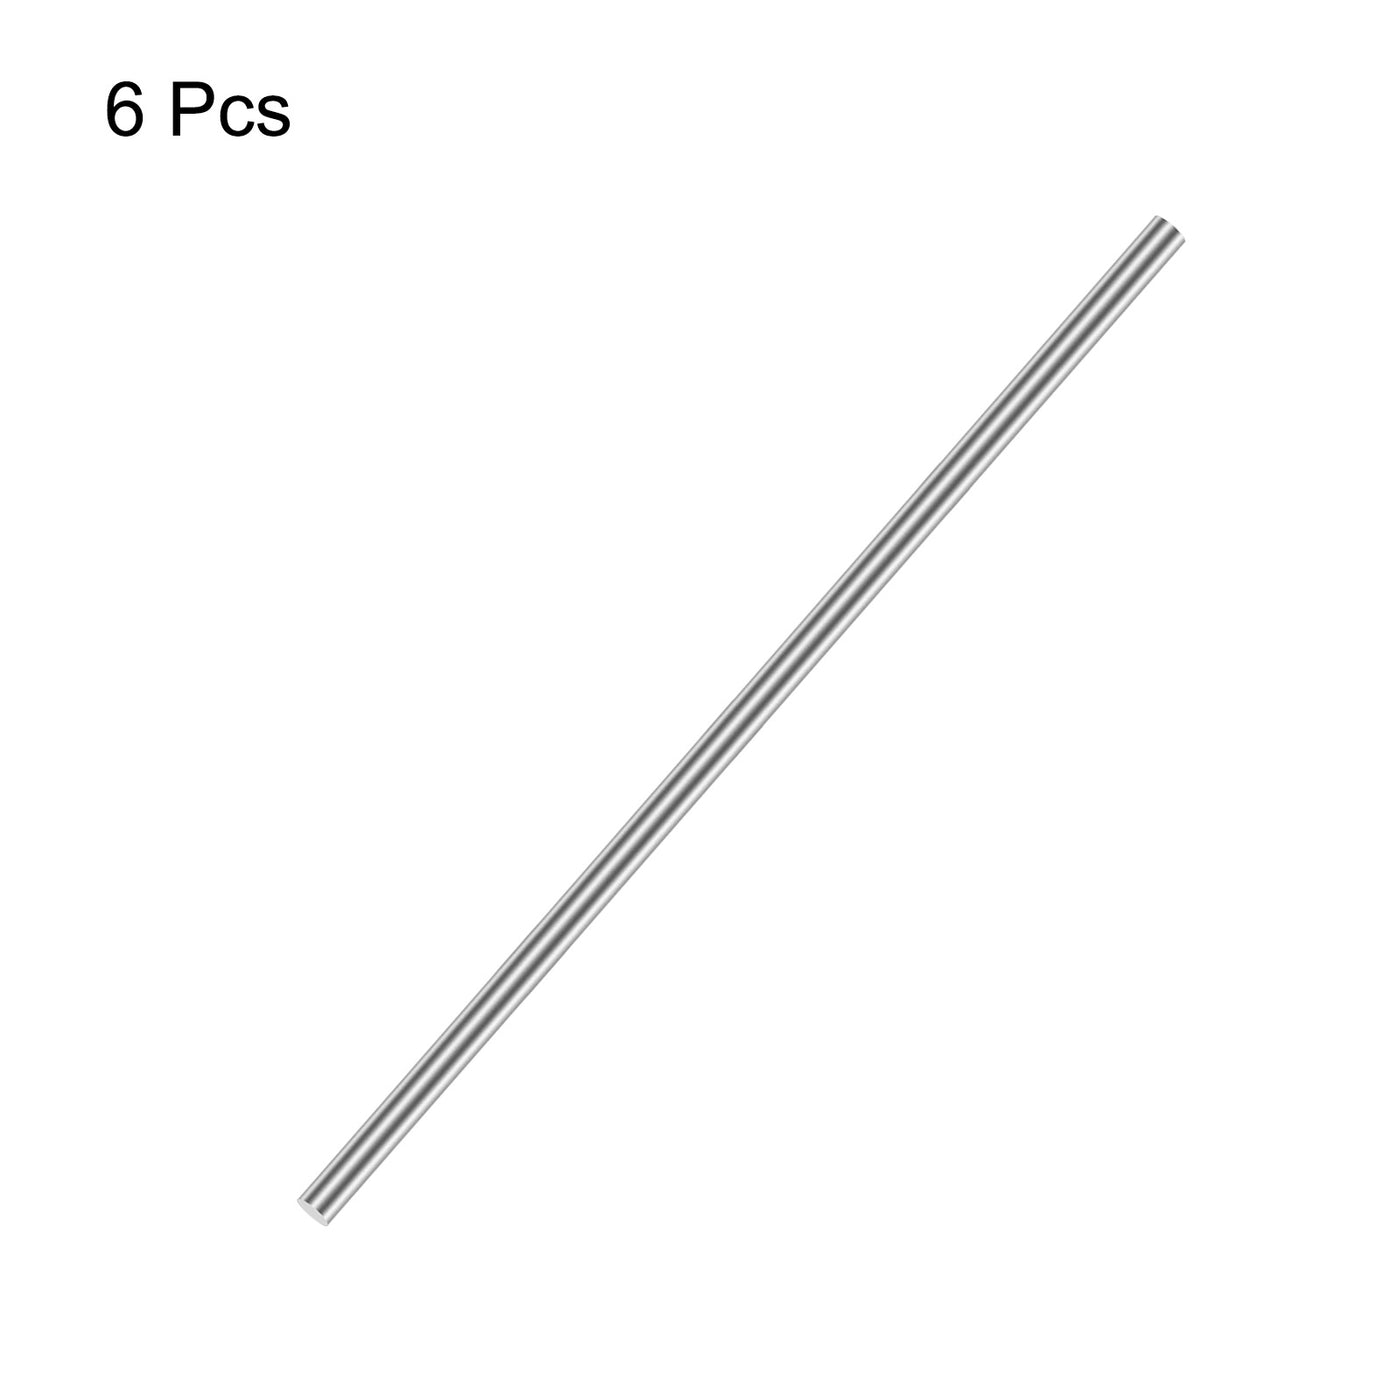 uxcell Uxcell 3mm x 250mm(1/8" x 10") 304 Stainless Steel Solid Round Rod for DIY Craft - 6pcs